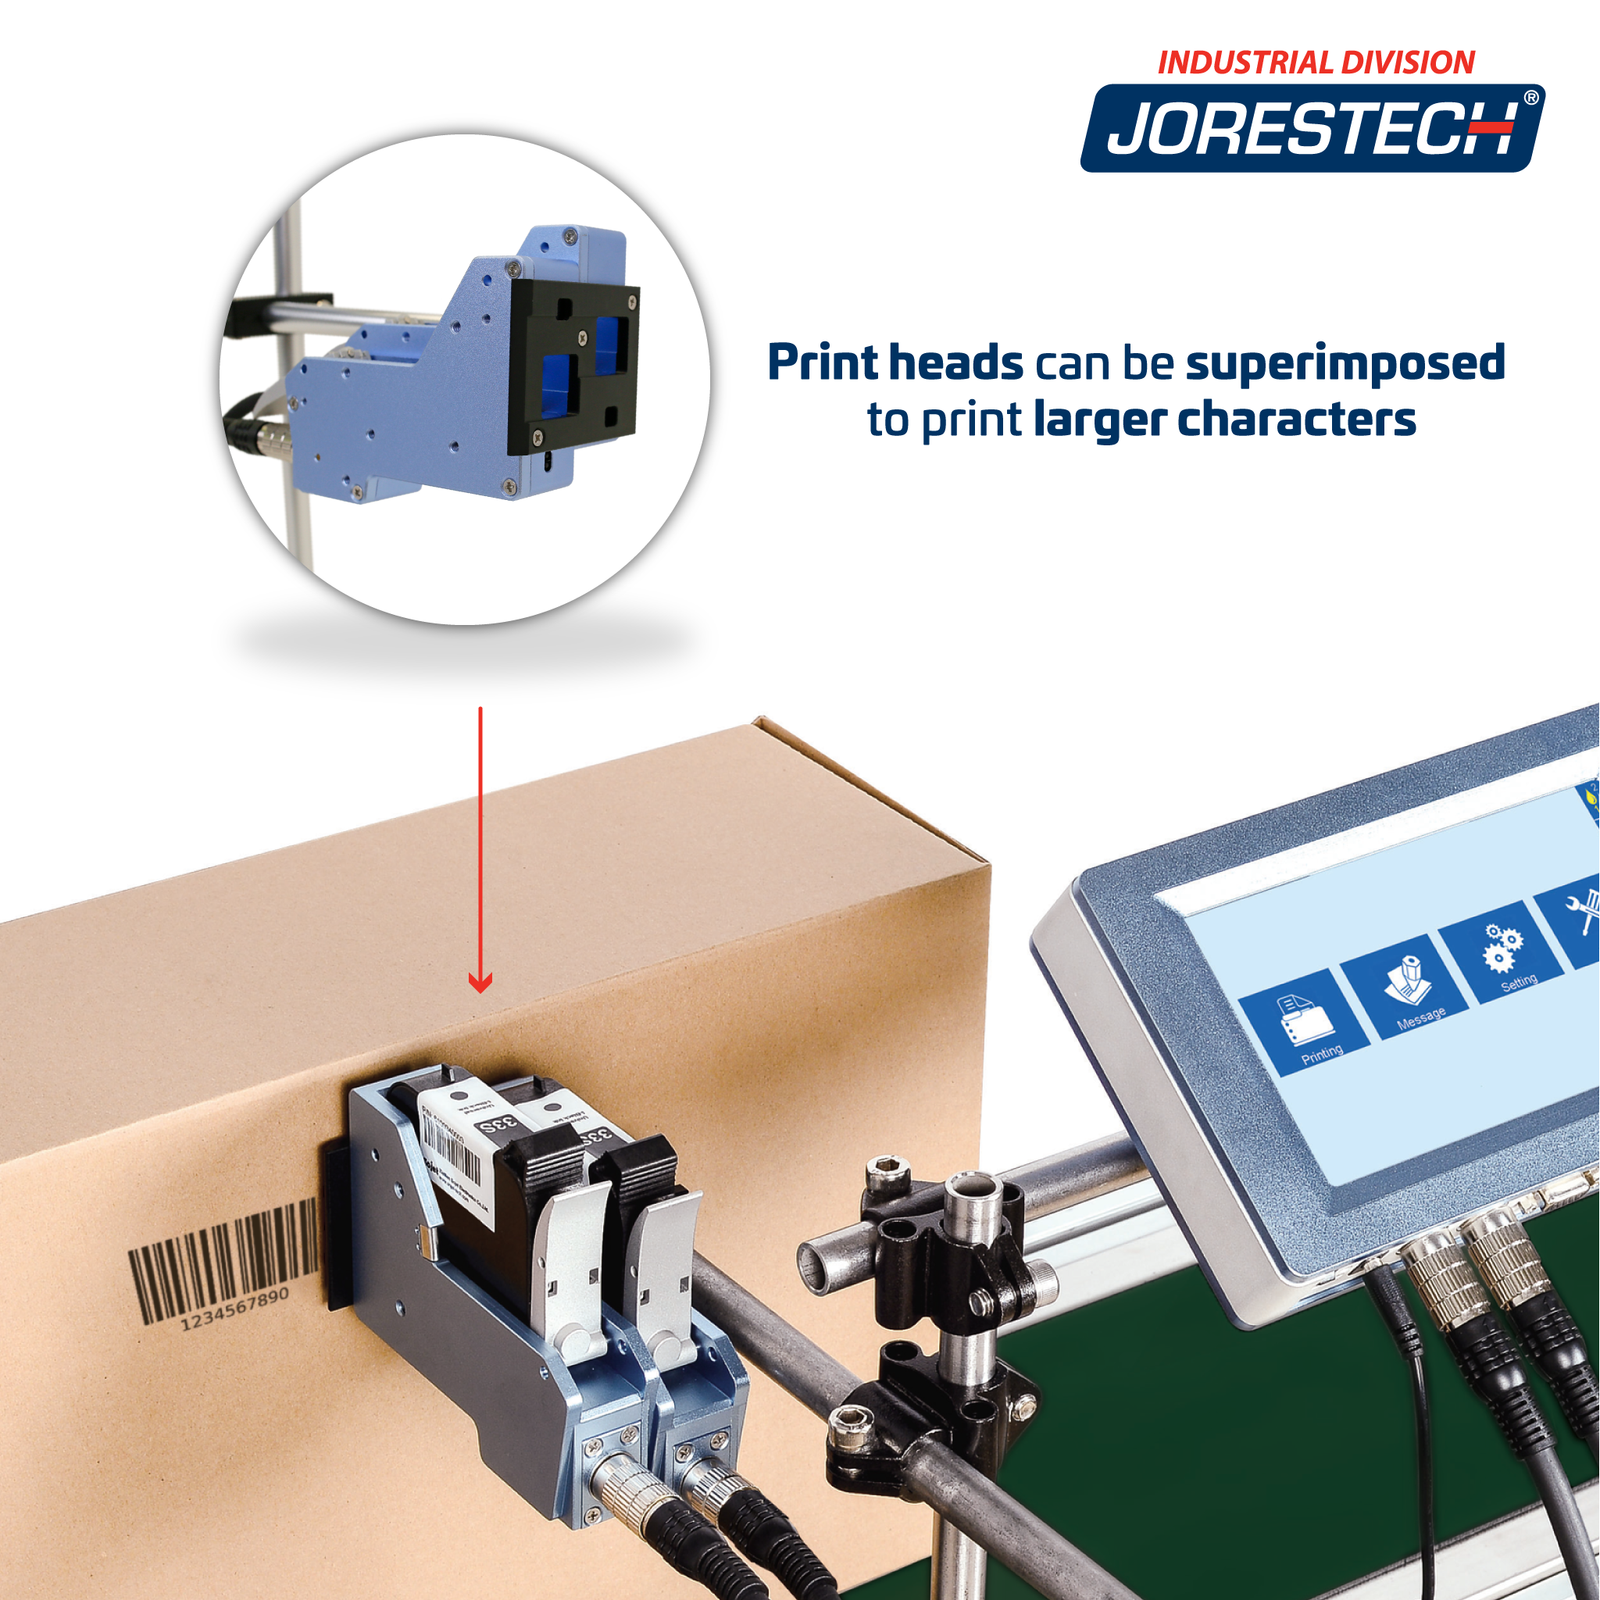 A JORESTECH TIJ dual head inkjet coder installed in a motorized conveyor as part of a production line. The print heads are superimposed printing a large barcode with numbers on a car box. Text reads print heads ca be superimposed to print larger characters